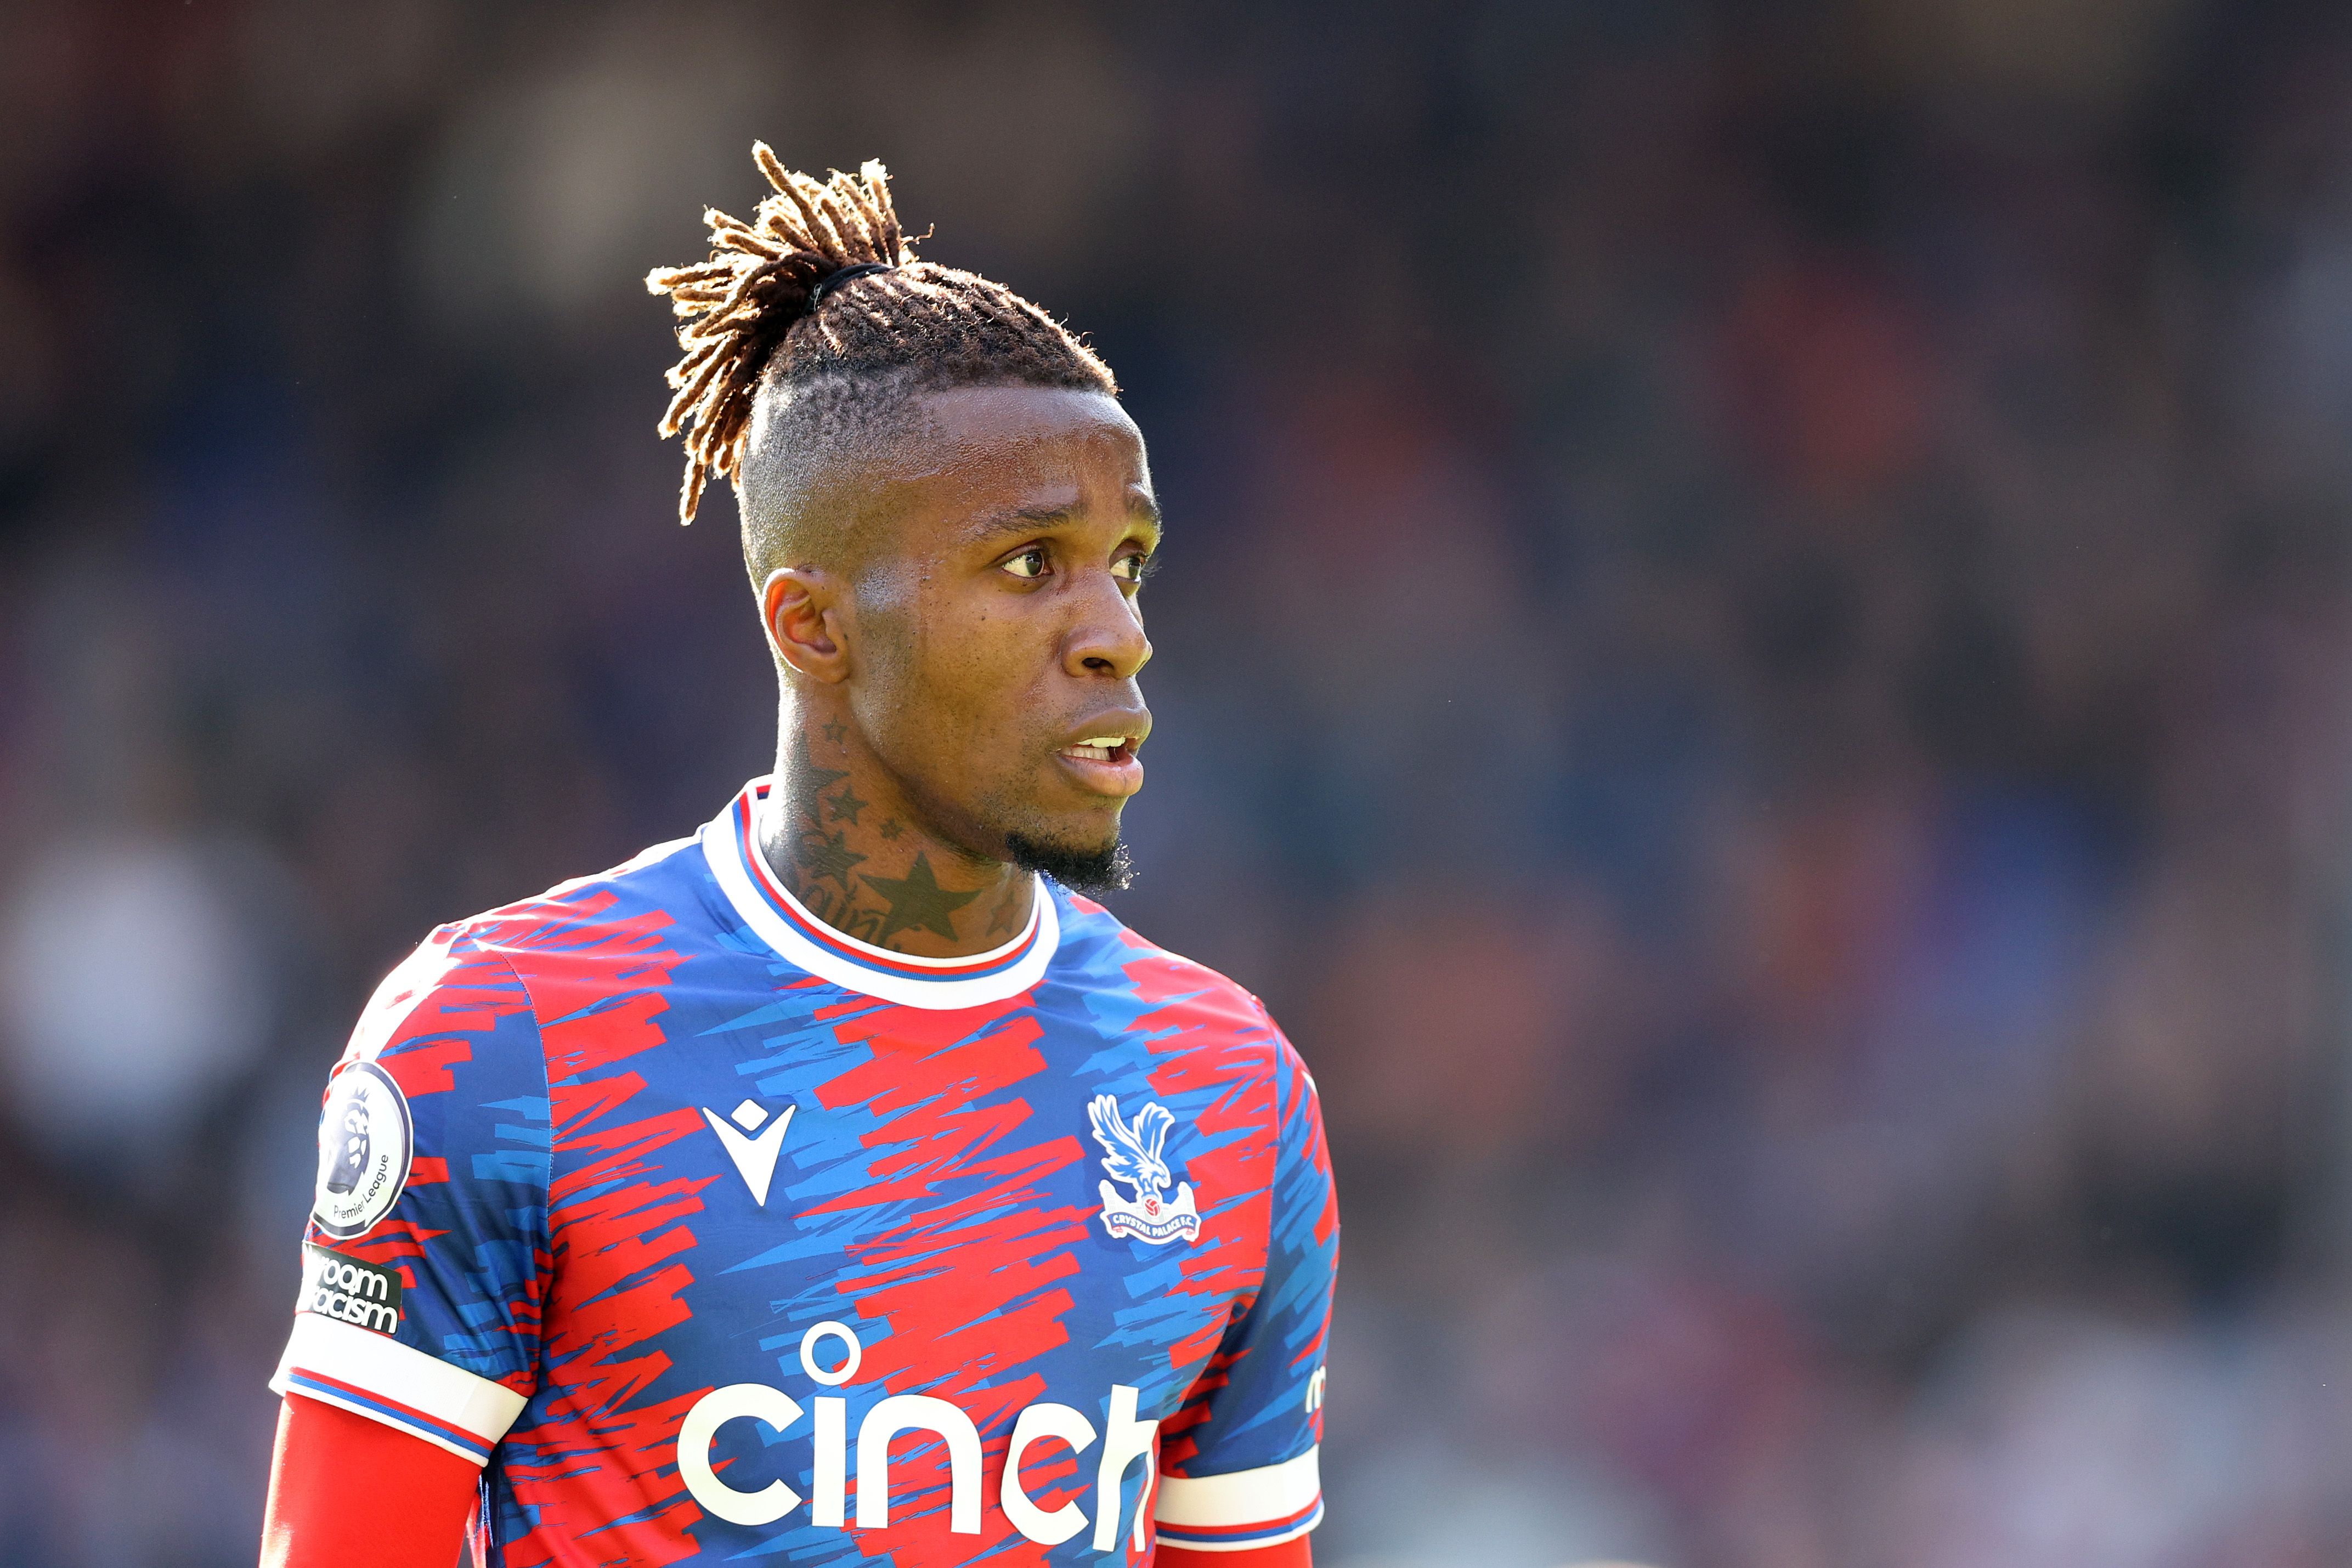  Wilfried Zaha of Crystal Palace in action during the Premier League match between Crystal Palace and Leeds